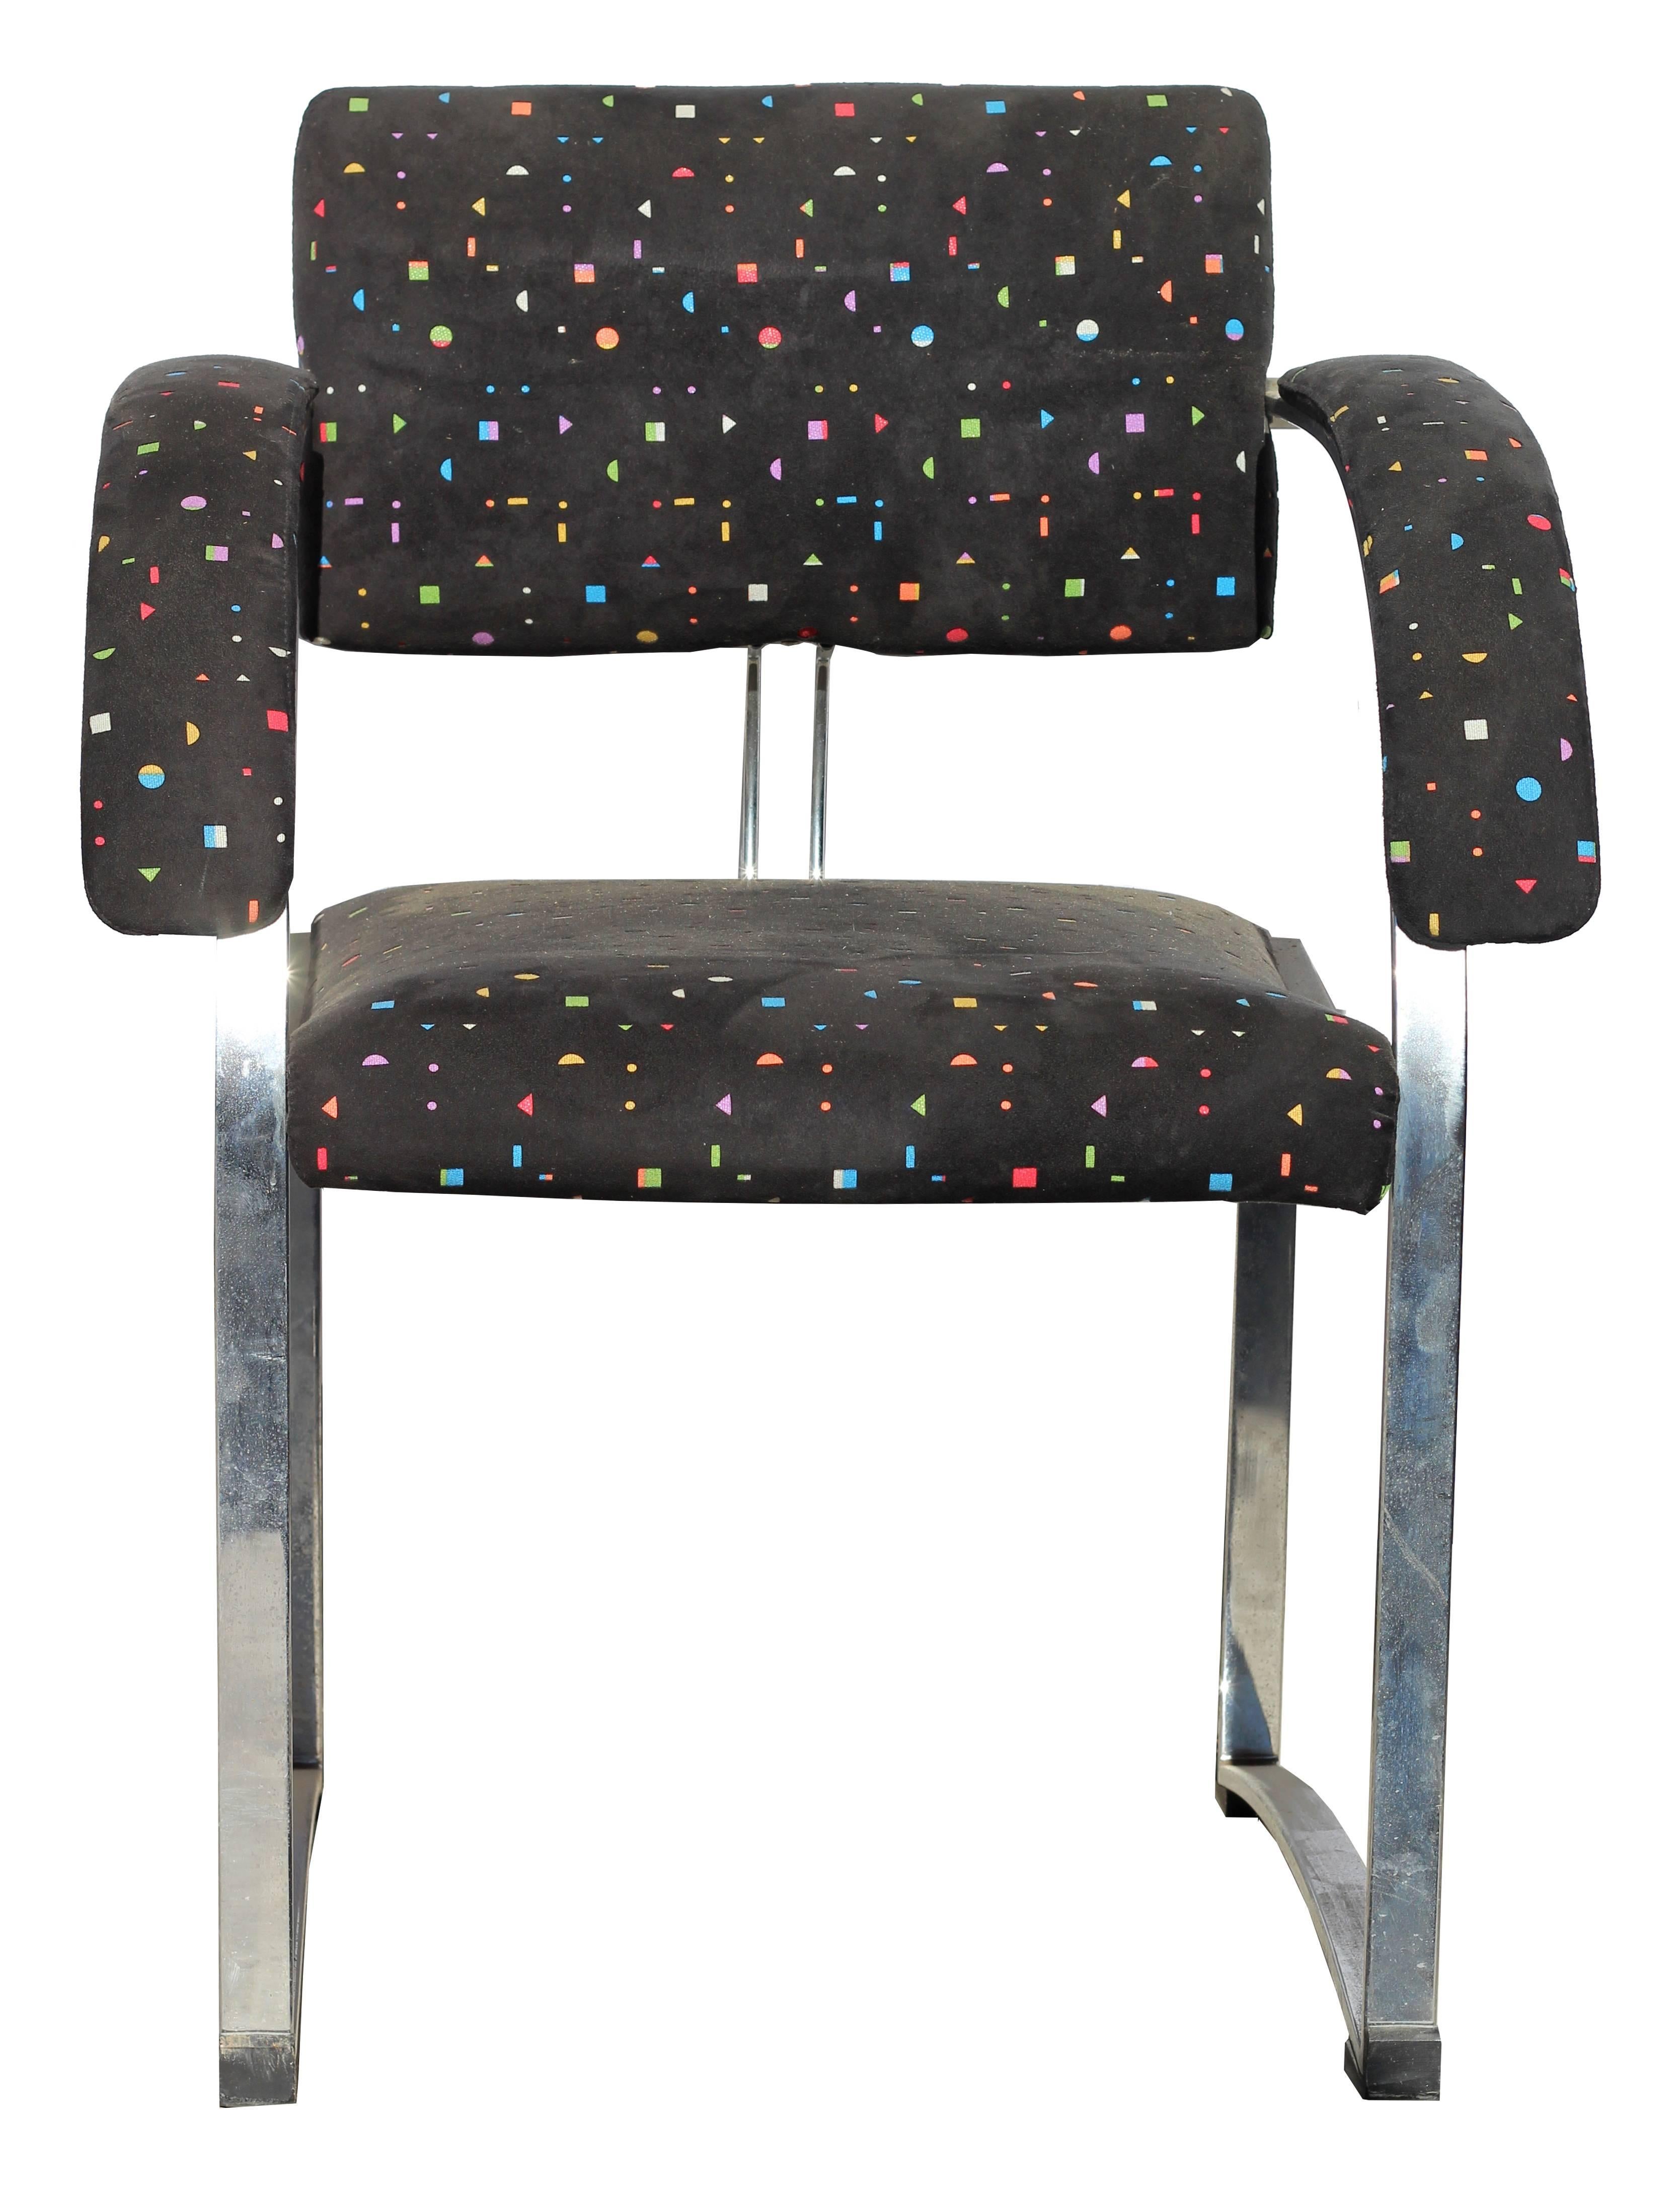 Italian modern design with the original upholstery, colors and geometric shapes.
 